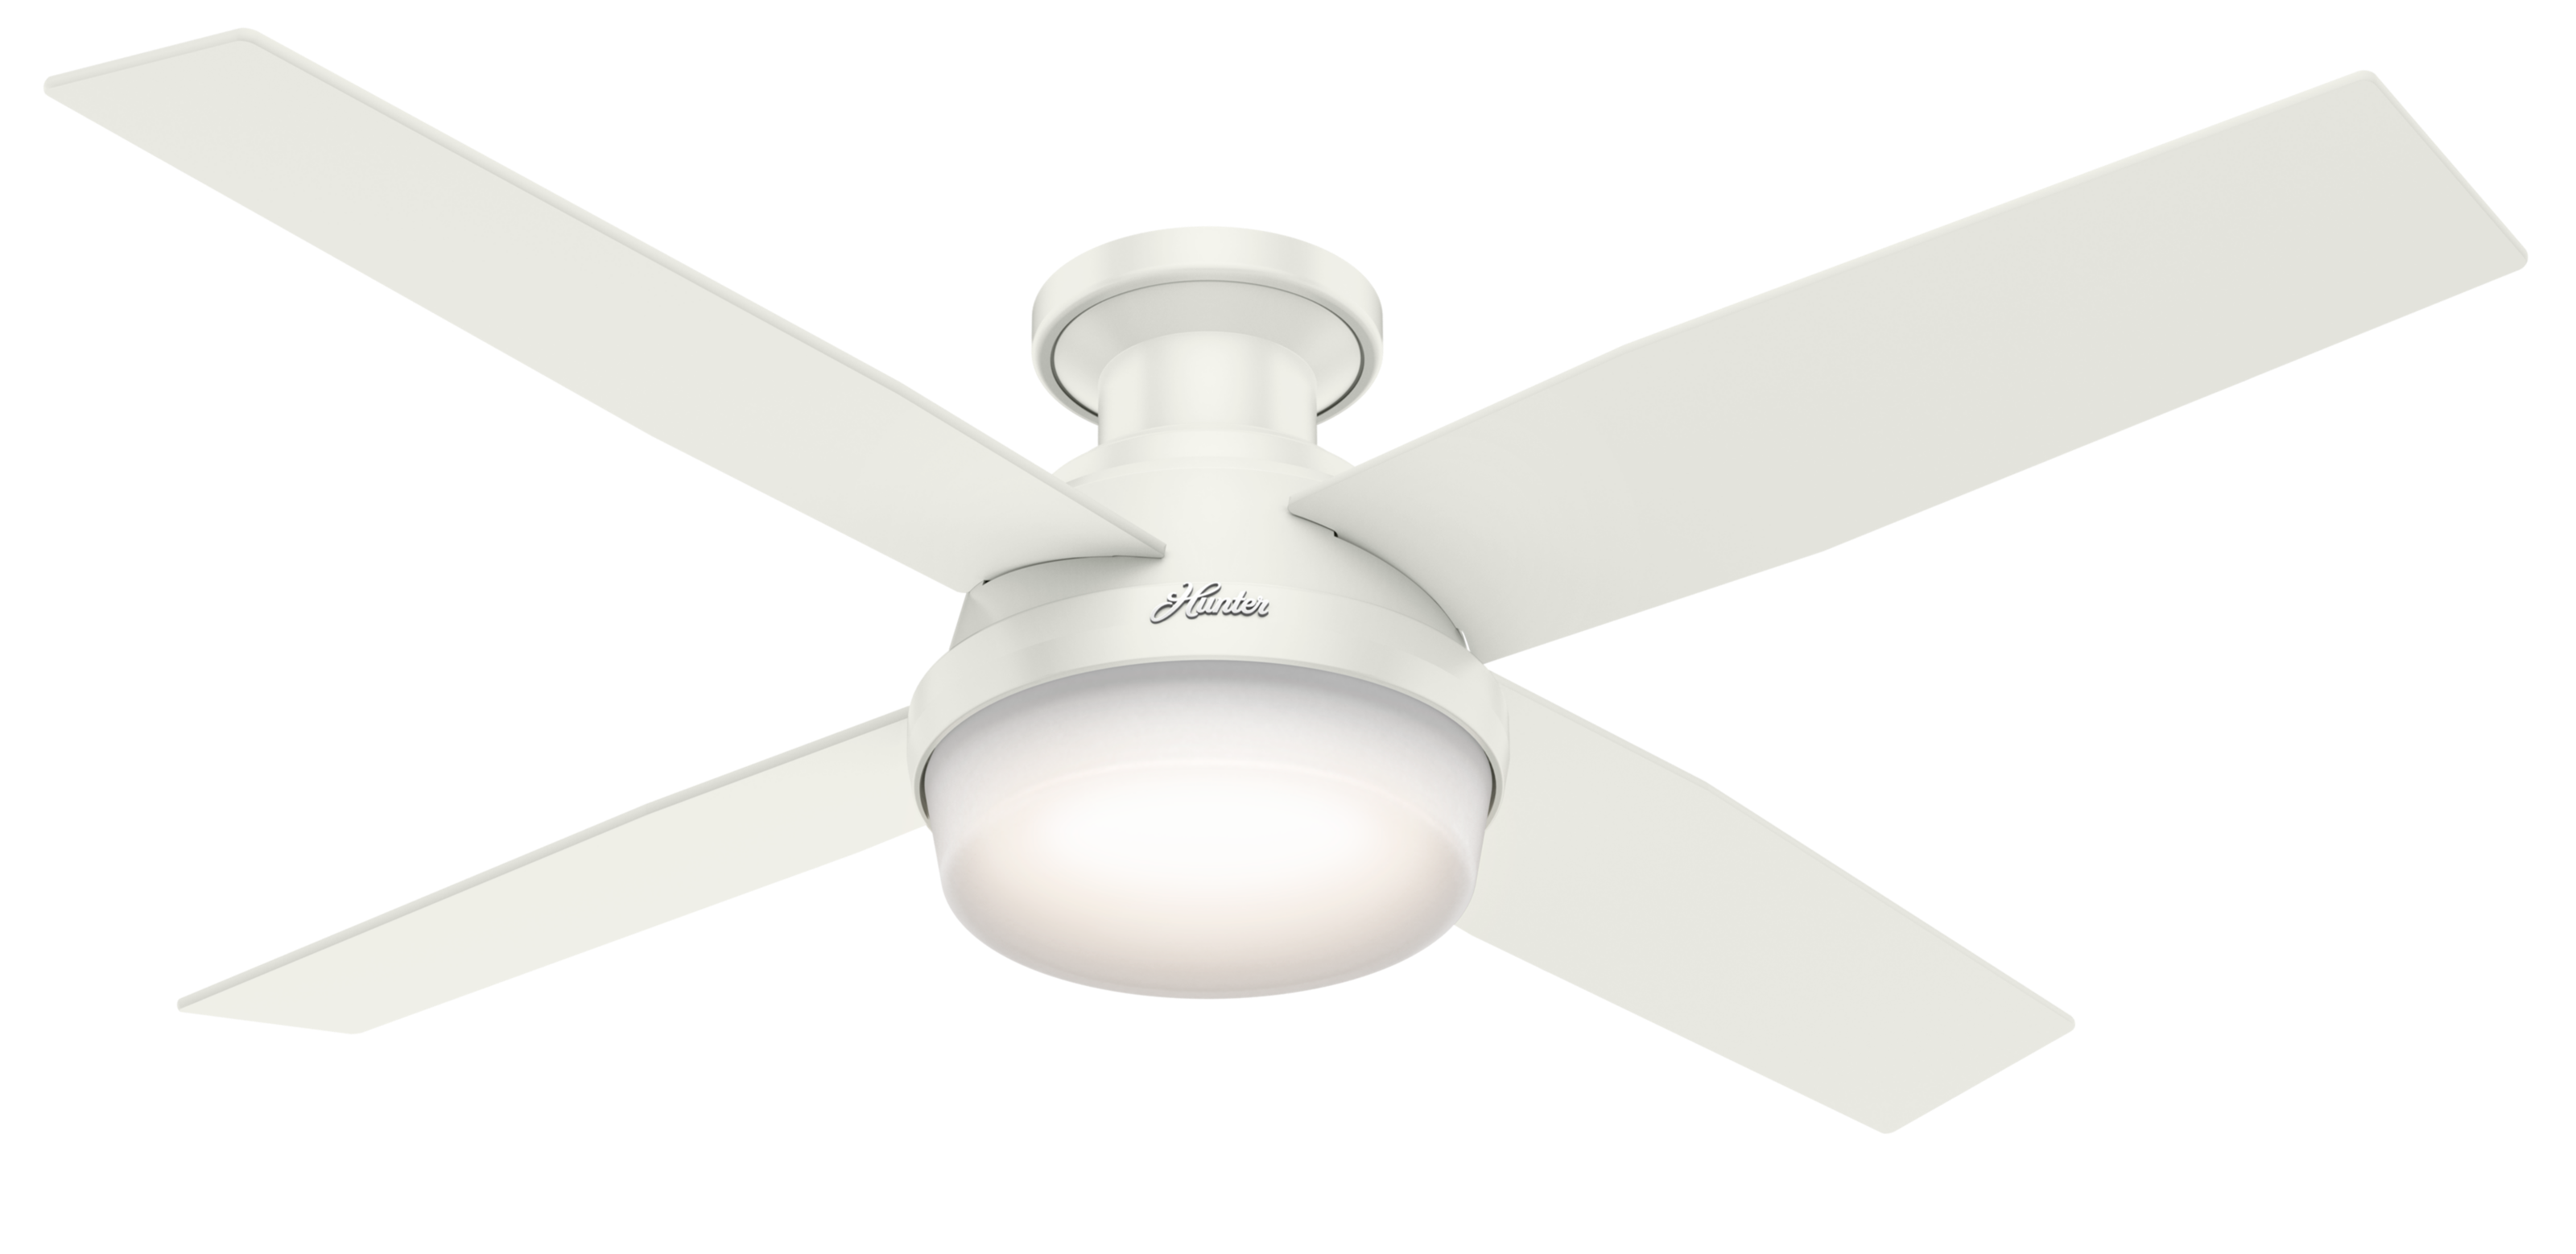 Ideal For Low Ceilings Bright Brass 52 Hunter Low Profile